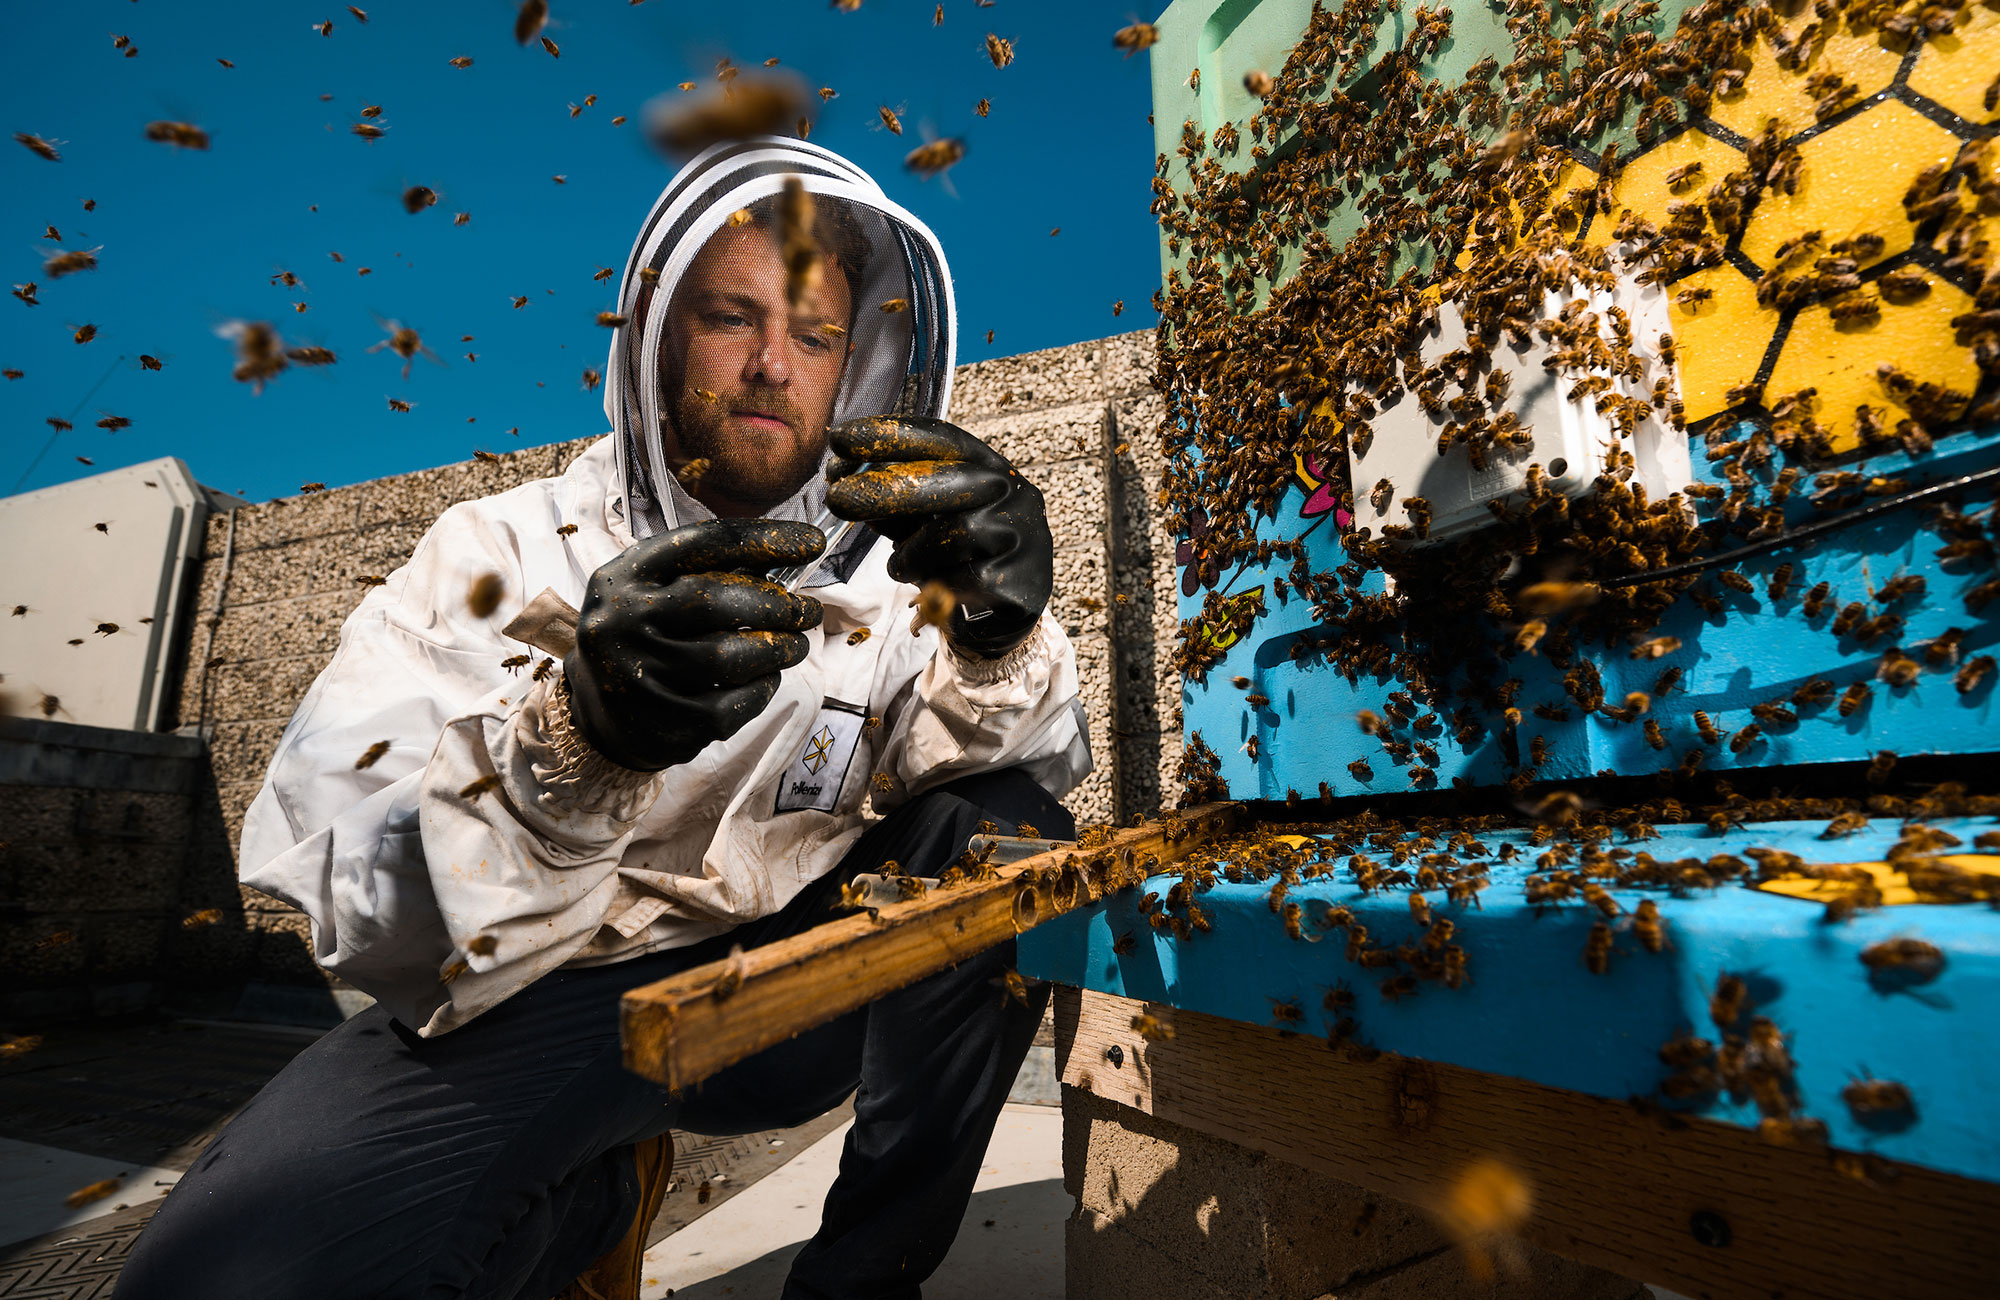 Beekeeper and hives